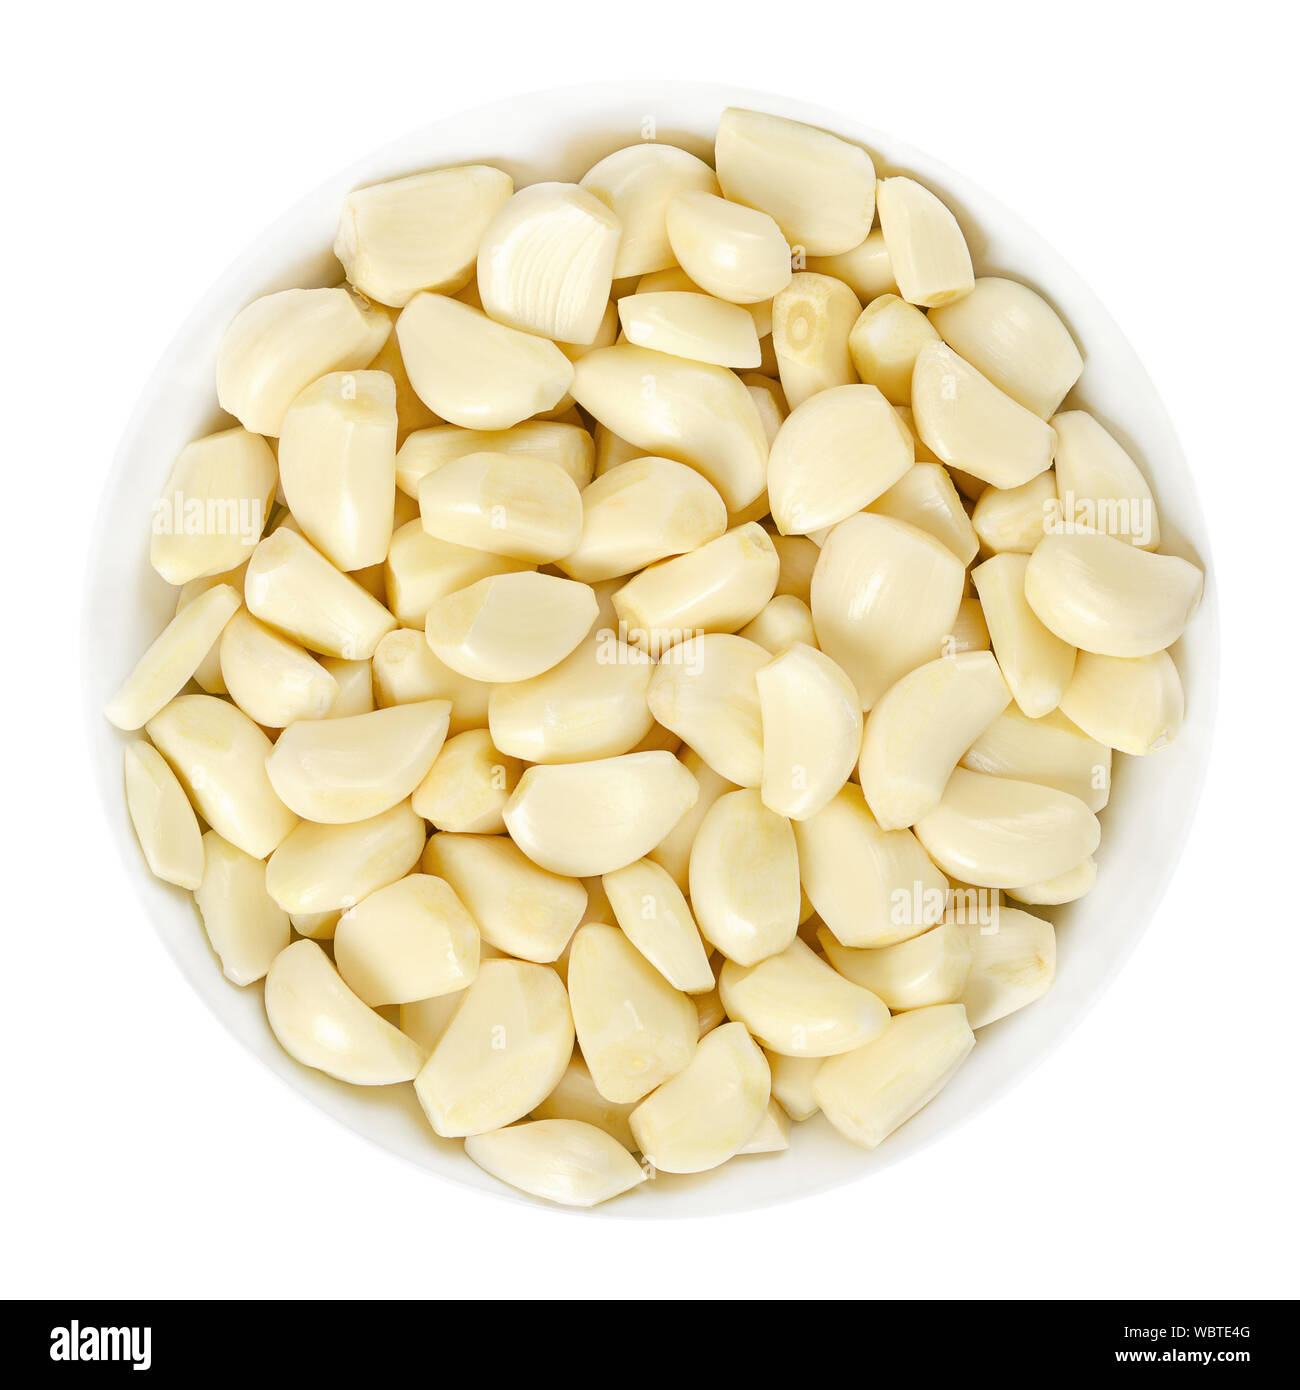 Peeled garlic cloves in white bowl, from above. Allium sativum, with pungent flavor, used as seasoning or condiment and in medicine. Stock Photo